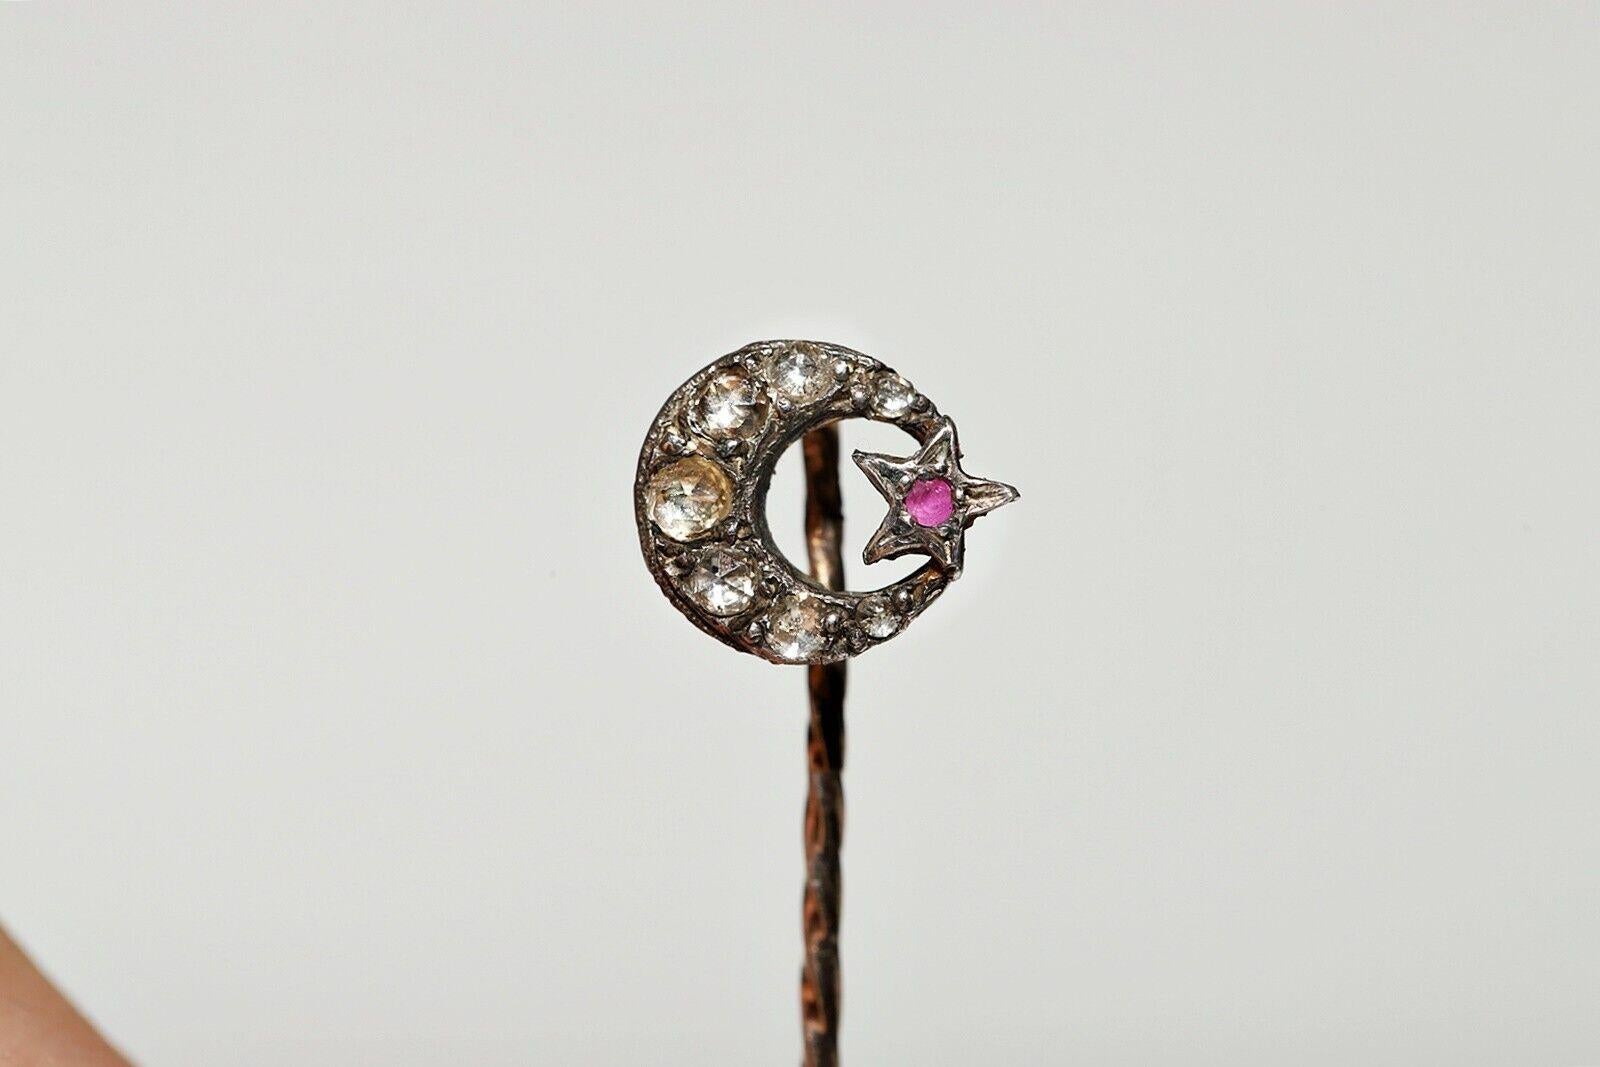 Antique 1900s Ottoman 10k Gold Natural Rose Cut Diamond Decorated Moon Brooch For Sale 2